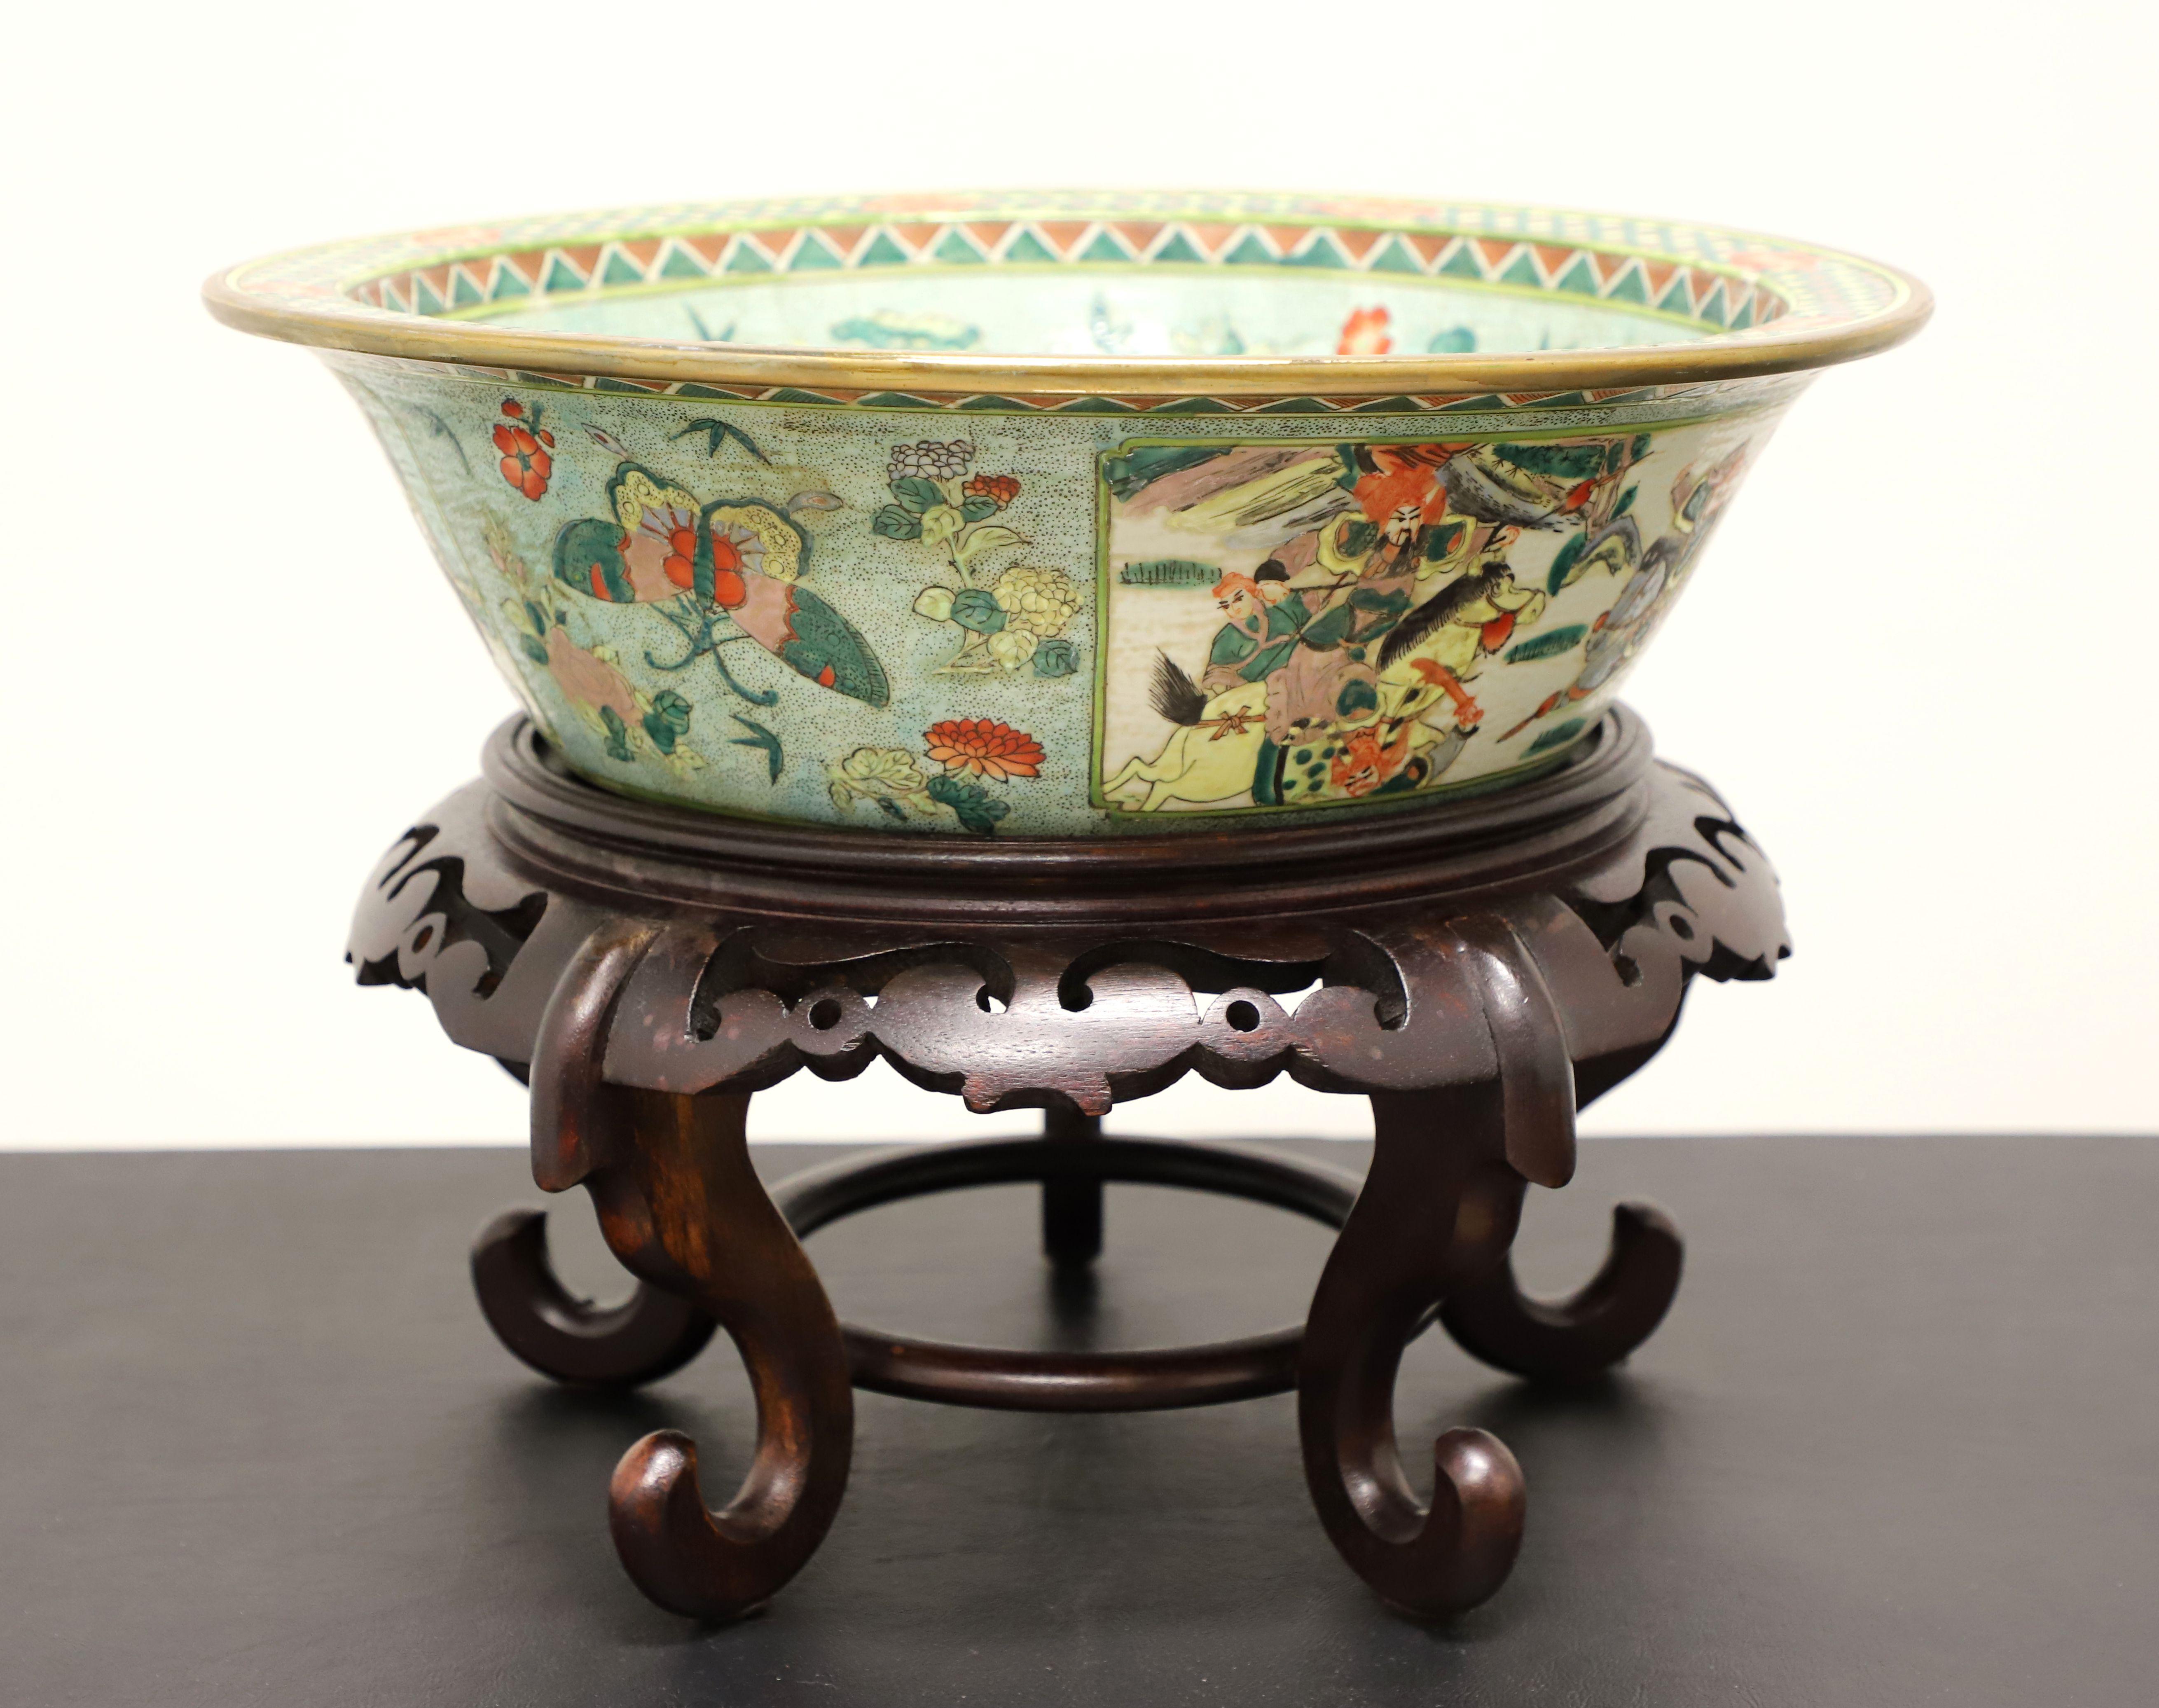 Chinoiserie Mid 20th Century Chinese Porcelain Bowl on Stand